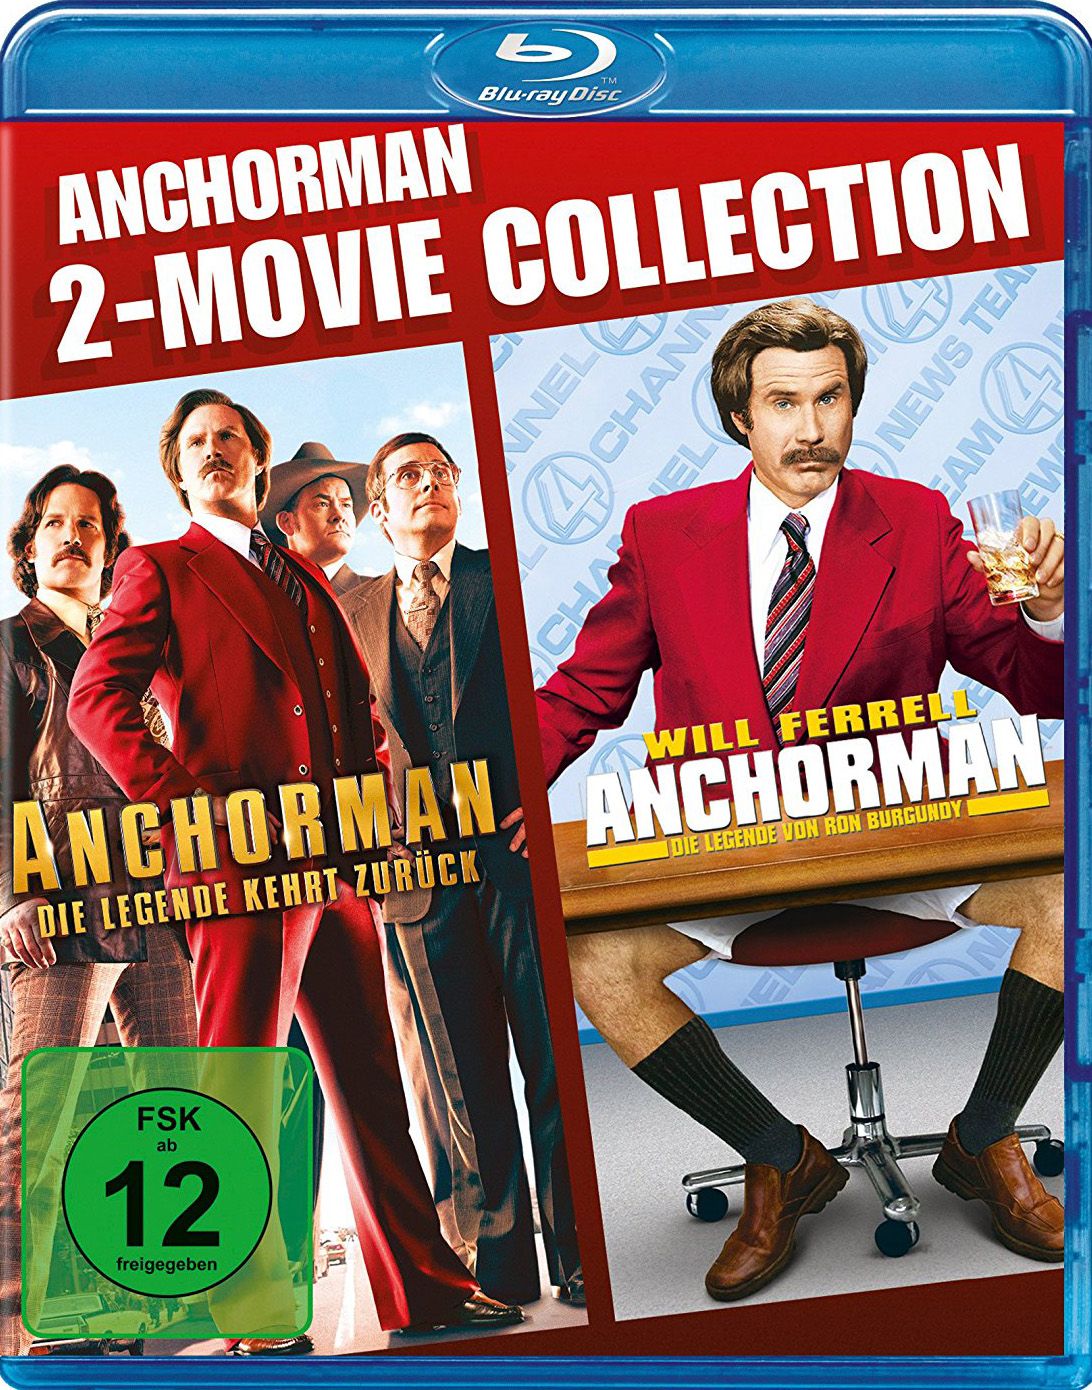 Anchorman 1 + 2 (Double Feature) (2 Discs) (BLURAY)